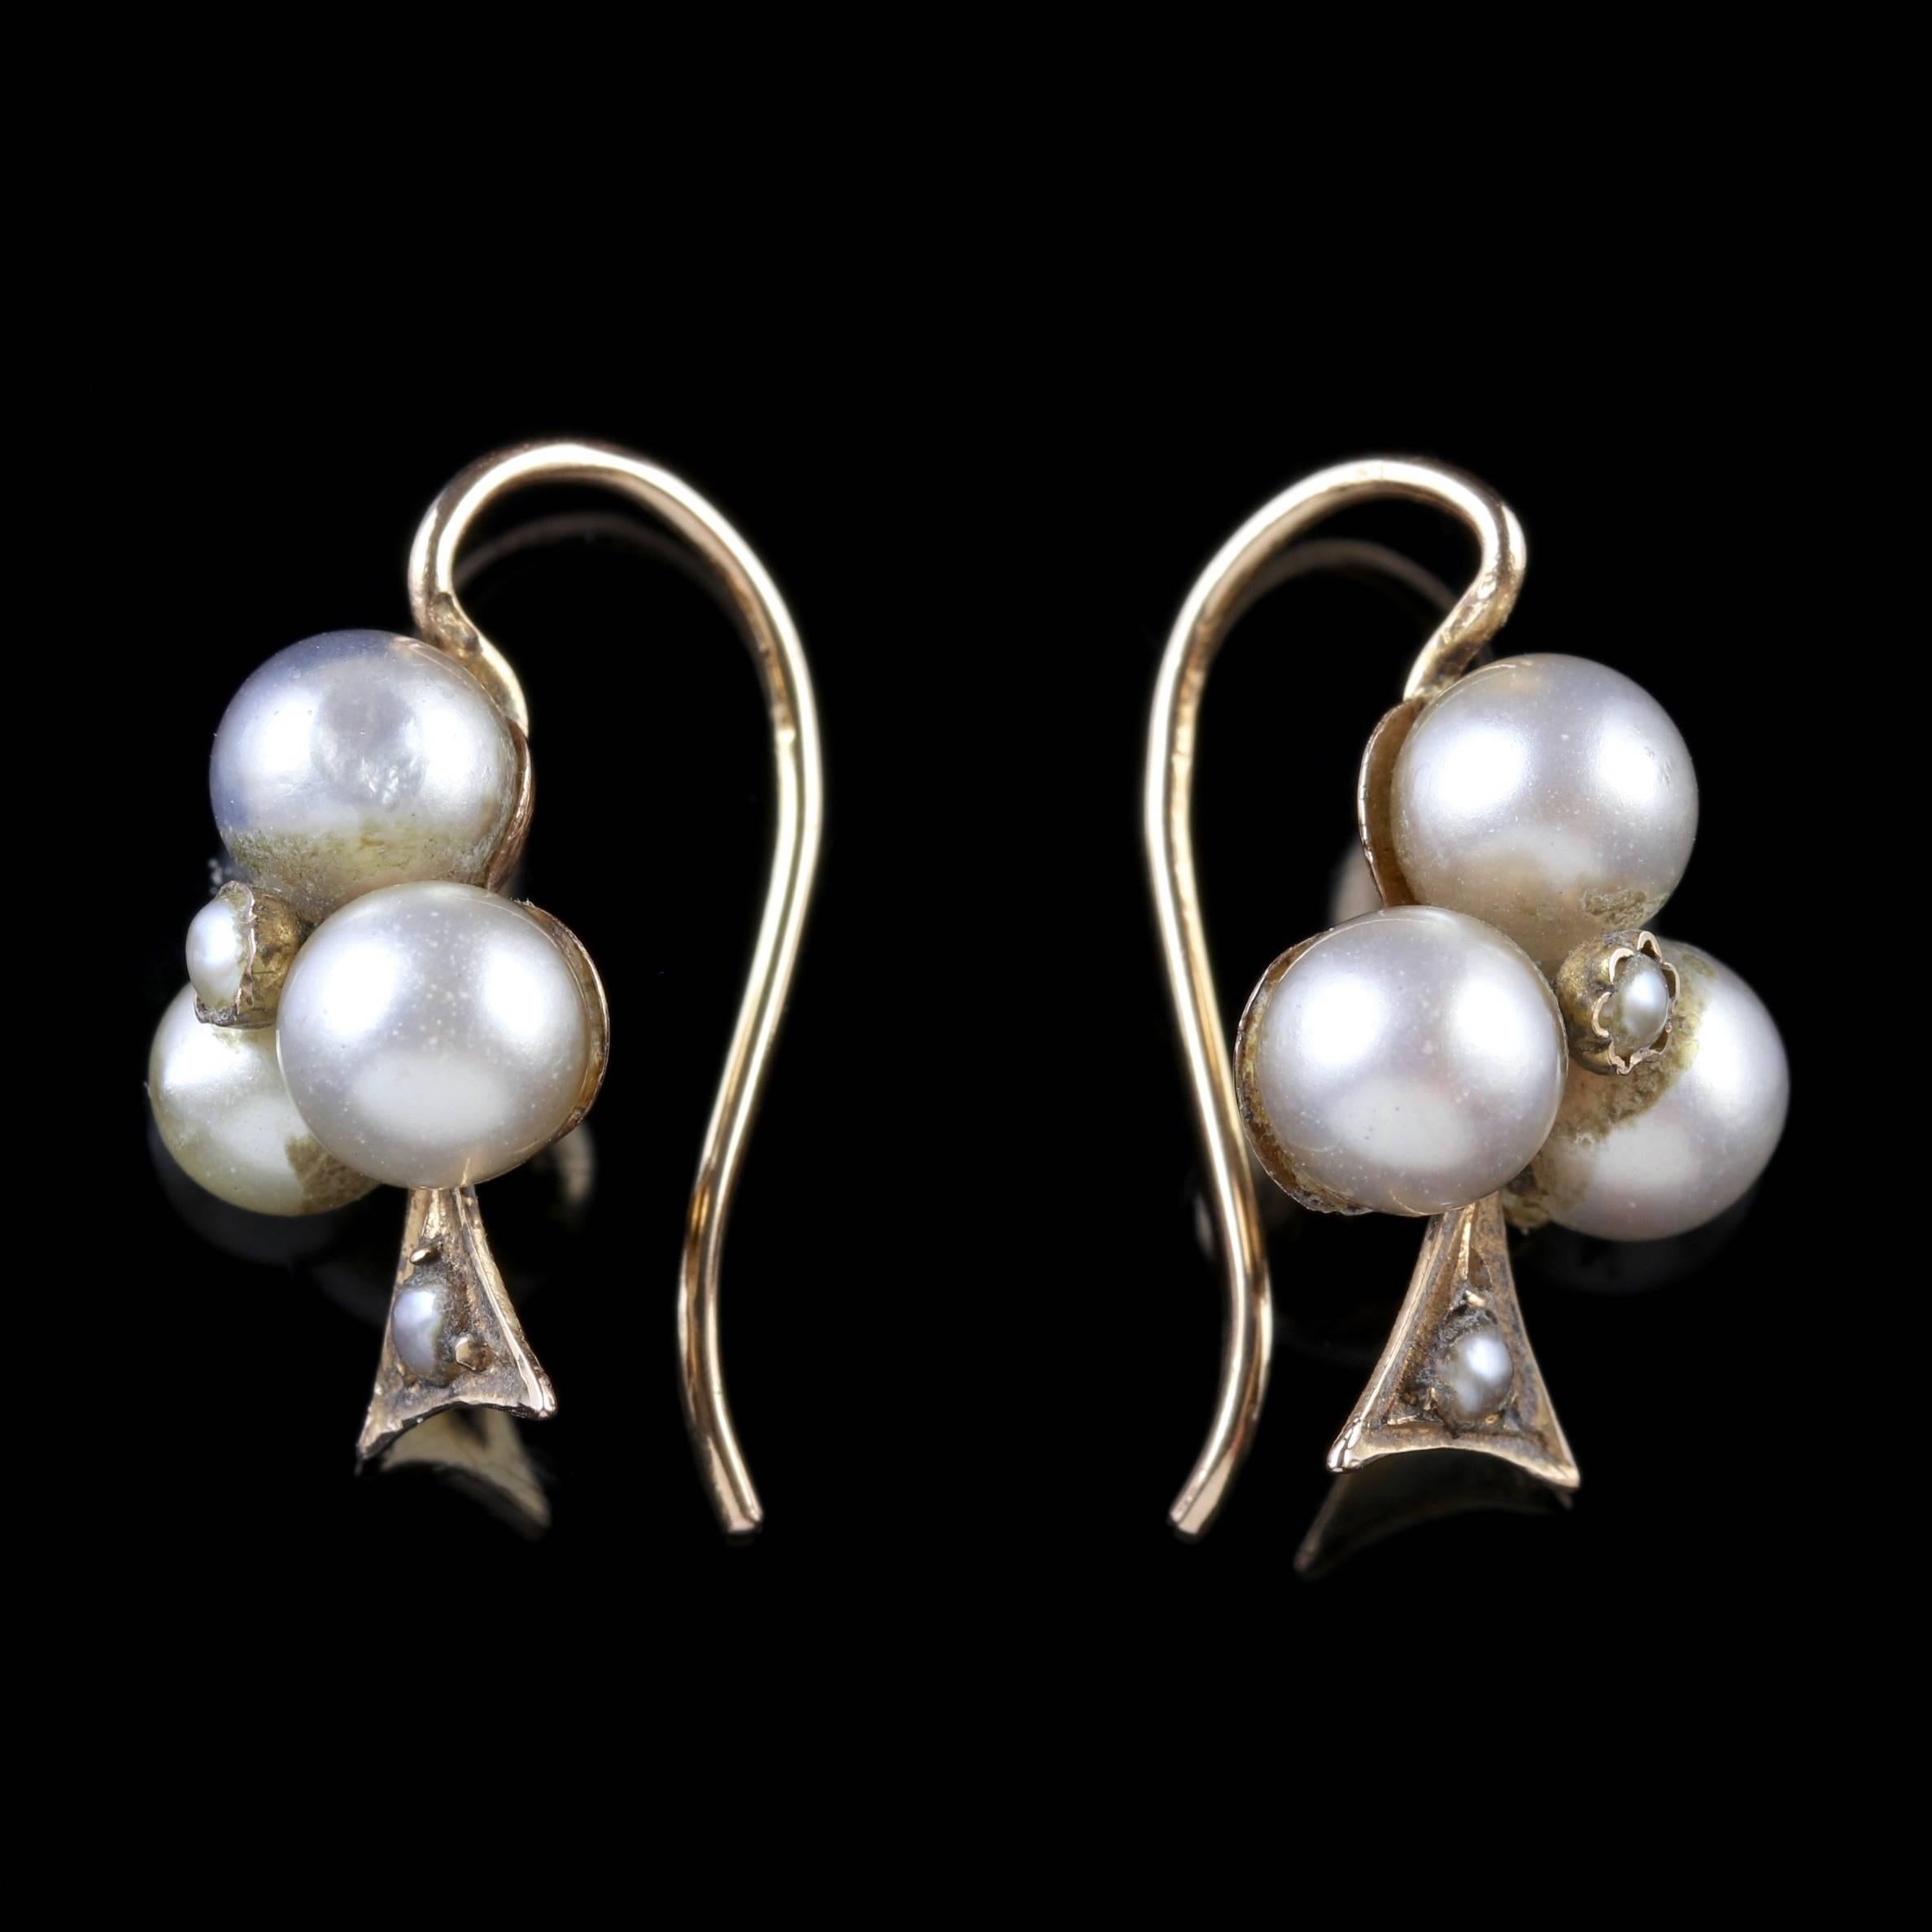 Women's Antique Victorian Pearl Earrings 18 Carat Gold, circa 1900 Boxed